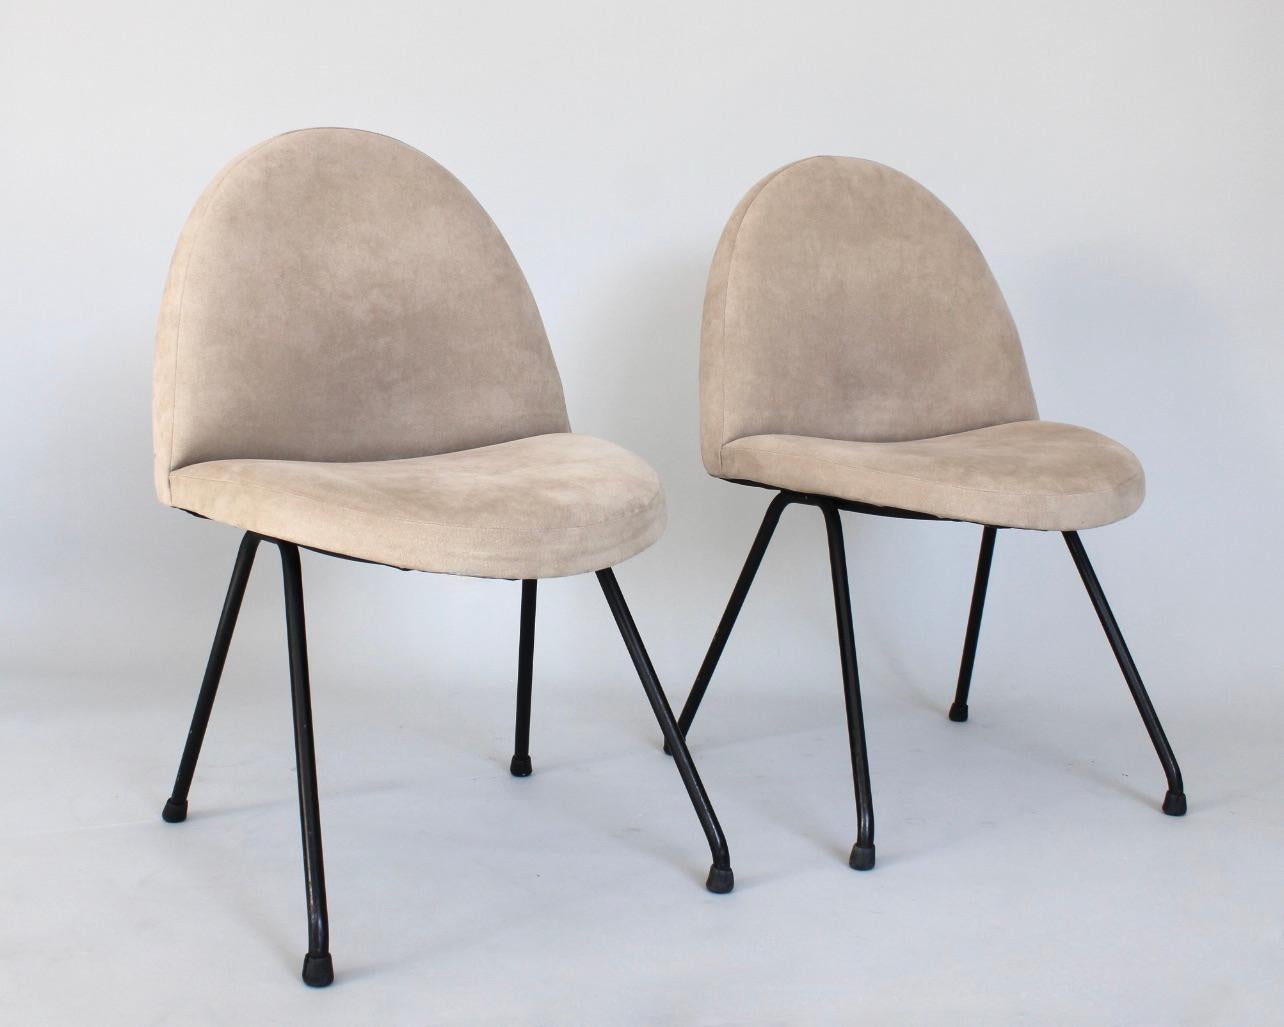 Pair of dining chairs by Joseph-Andre Motte the model 771 Tongue Chair reupholstered in tan suede. Black enameled steel base and legs.
These chairs were designed in 1954 by Joseph-André Motte for Steiner France, as part of his series for Steiner.